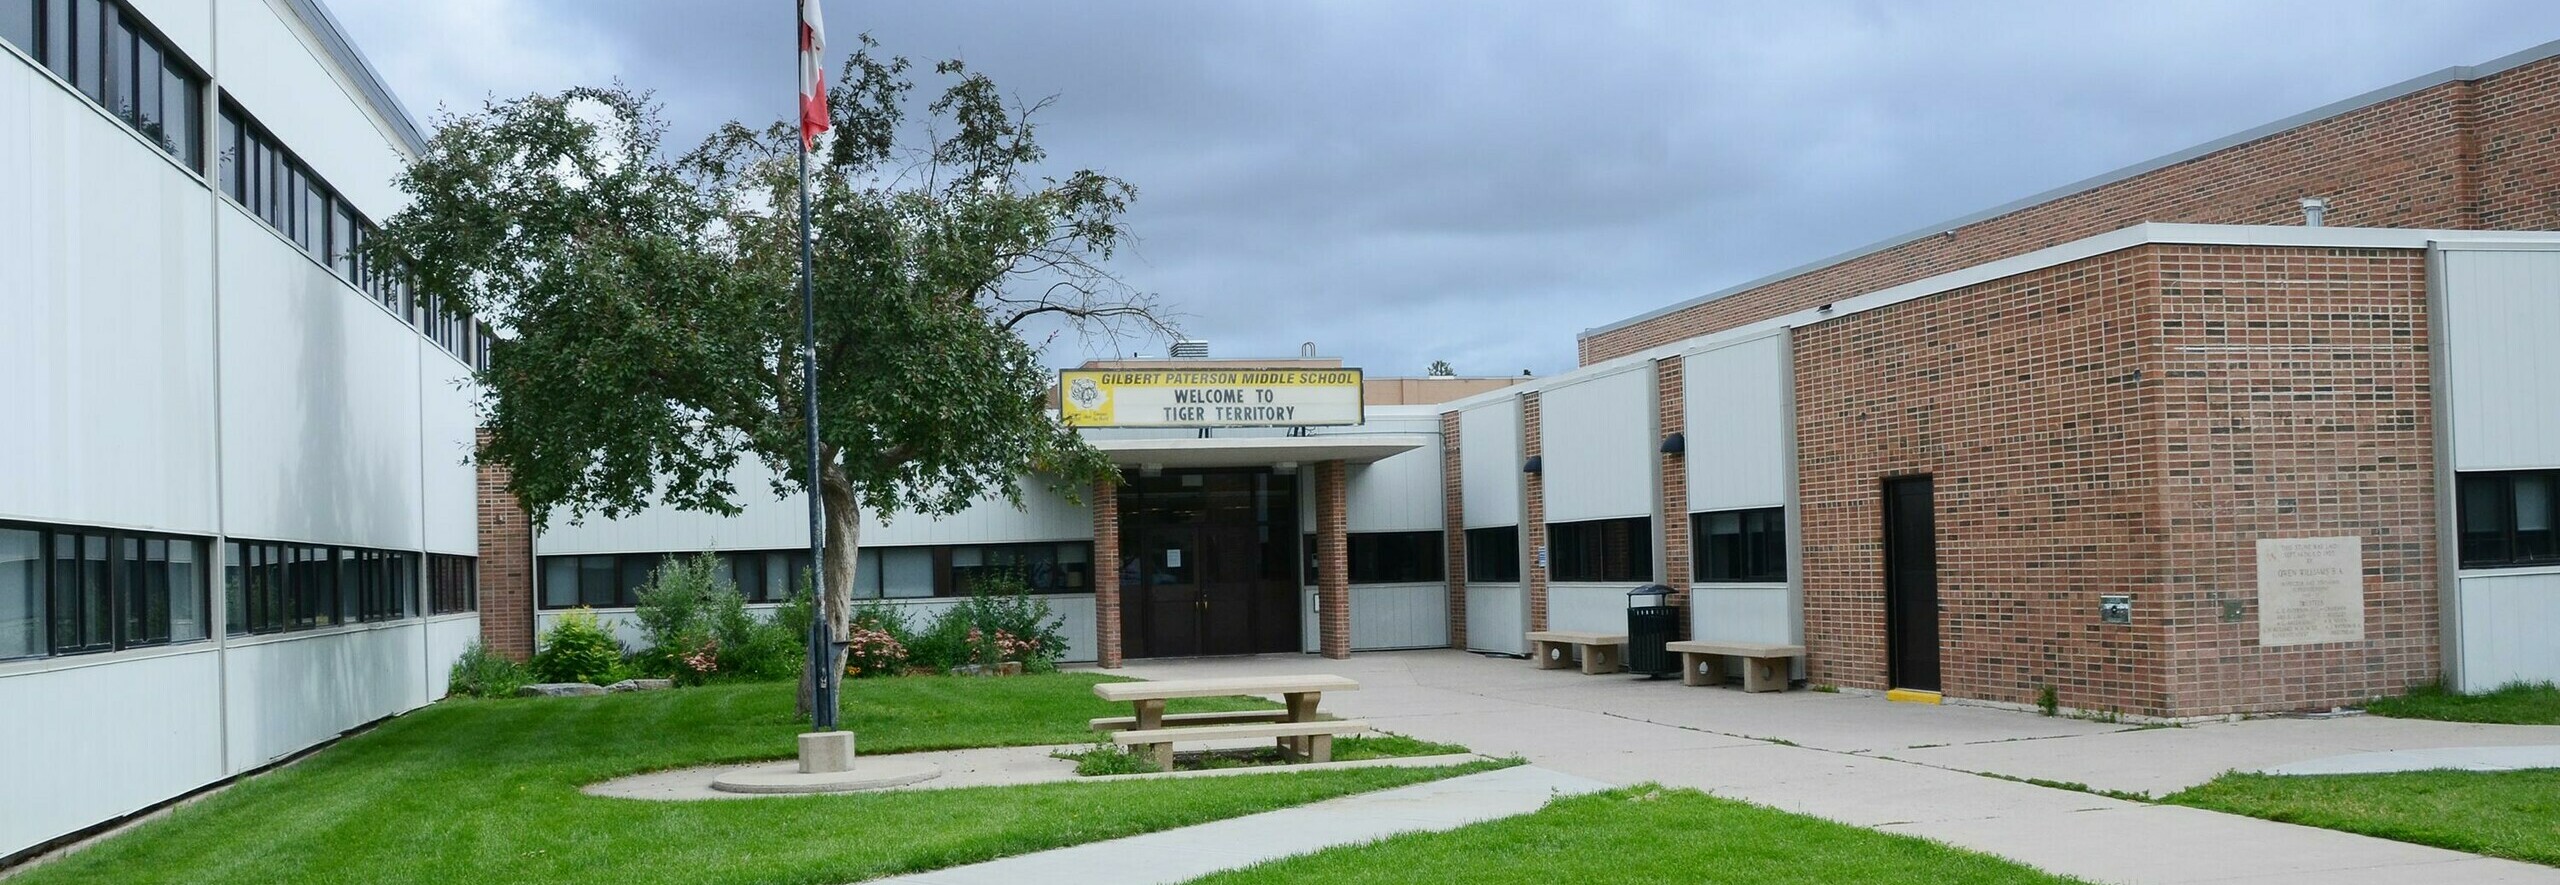 Gilbert Paterson Middle School Banner Photo